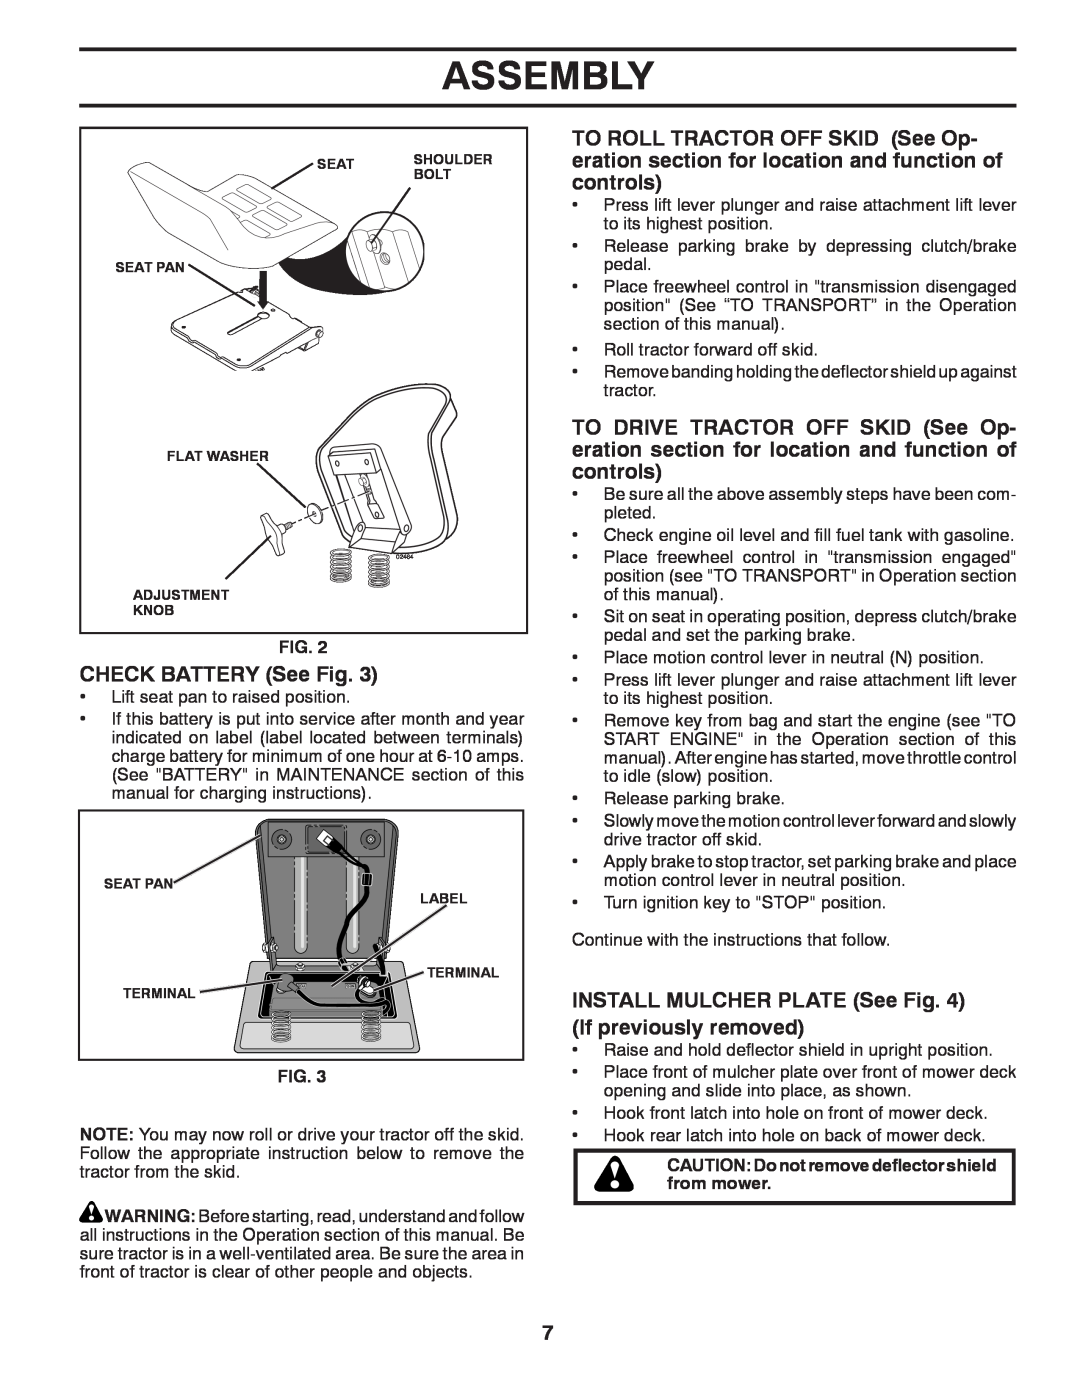 Murray 96017000700 manual CHECK BATTERY See Fig, INSTALL MULCHER PLATE See If previously removed, Assembly 